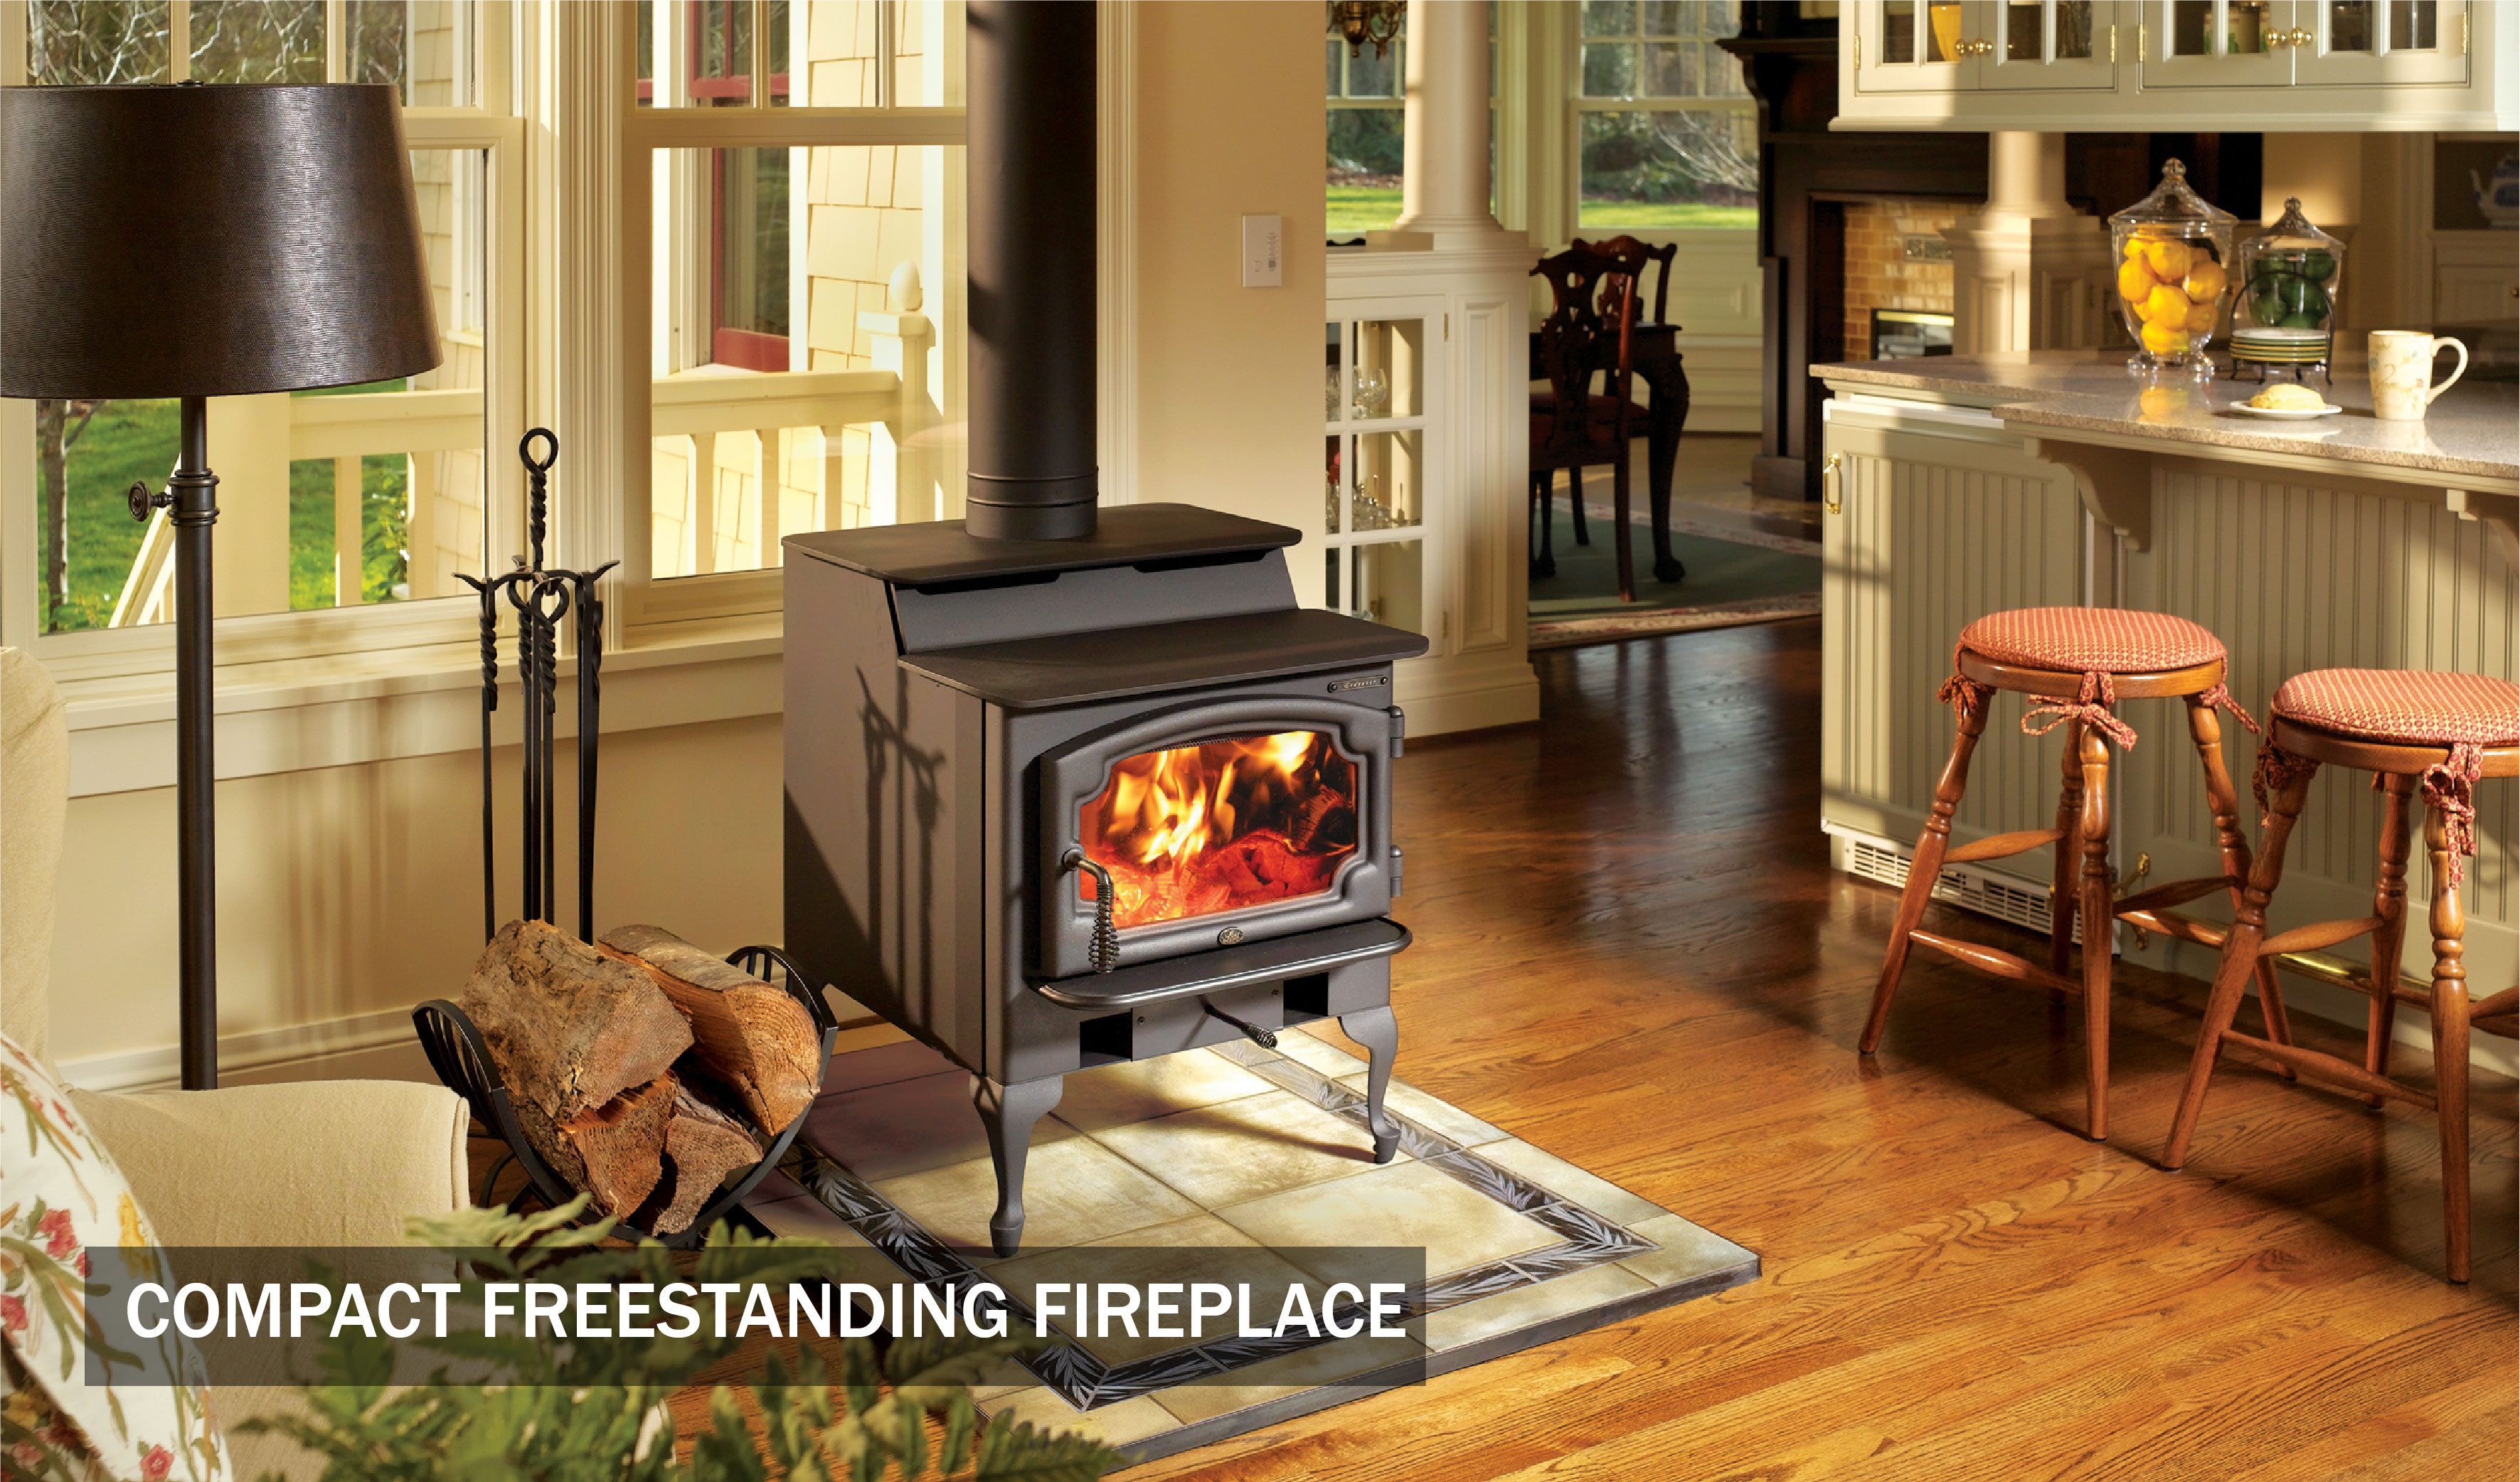 Some compact freestanding fireplace models